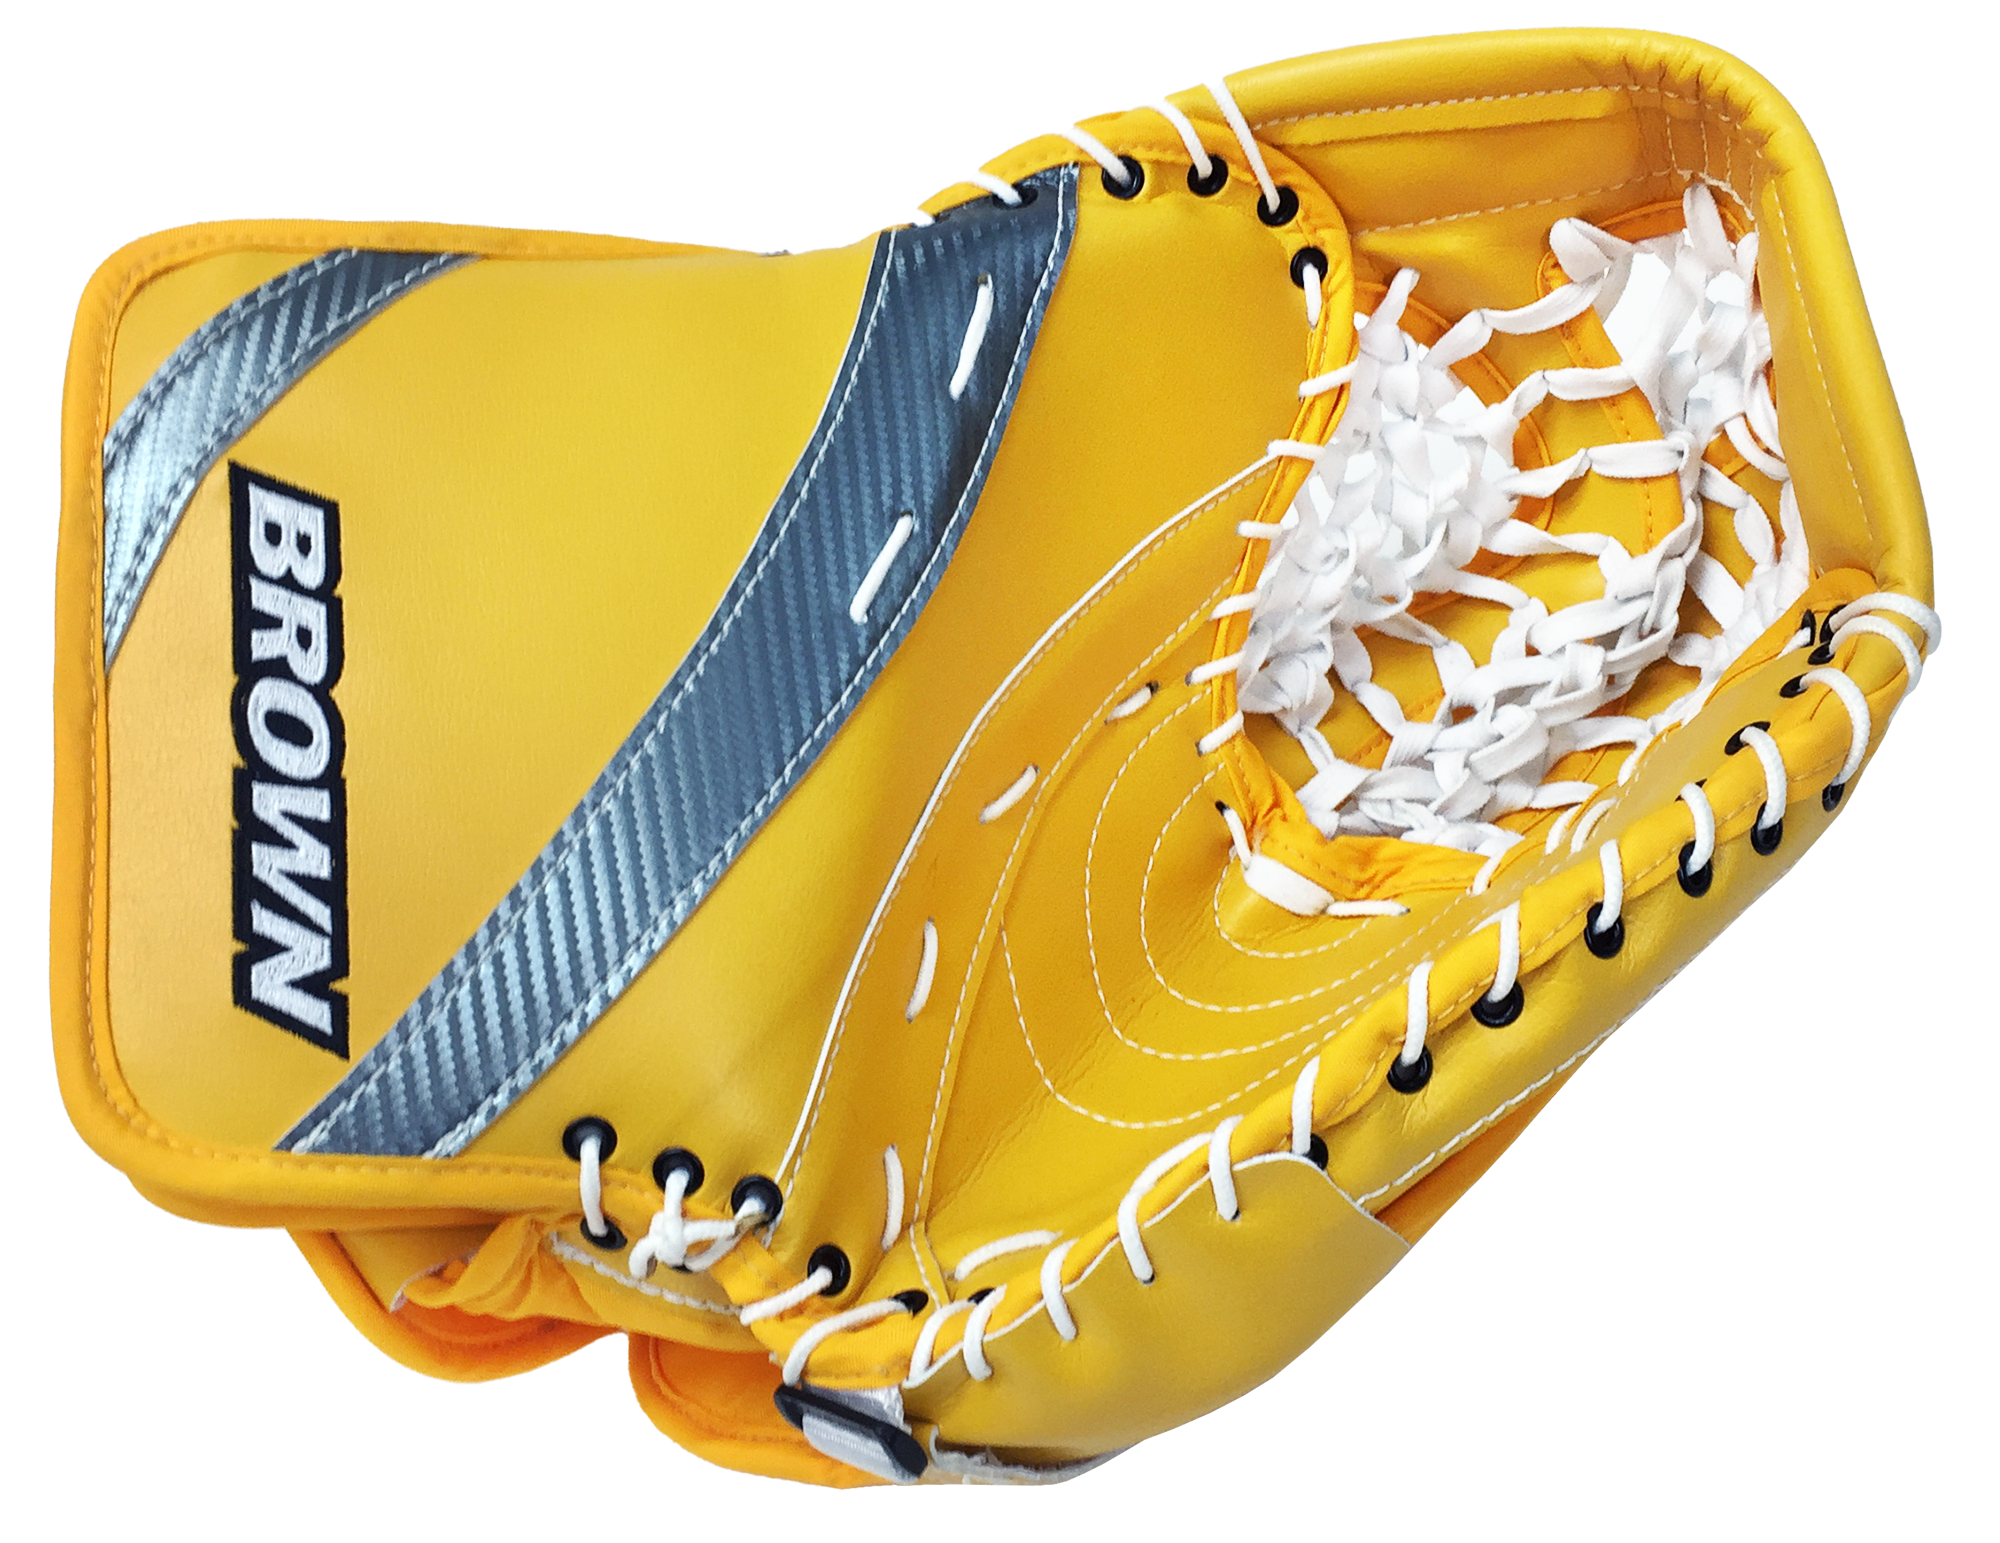 2500 sport gold and stainless steel catch glove